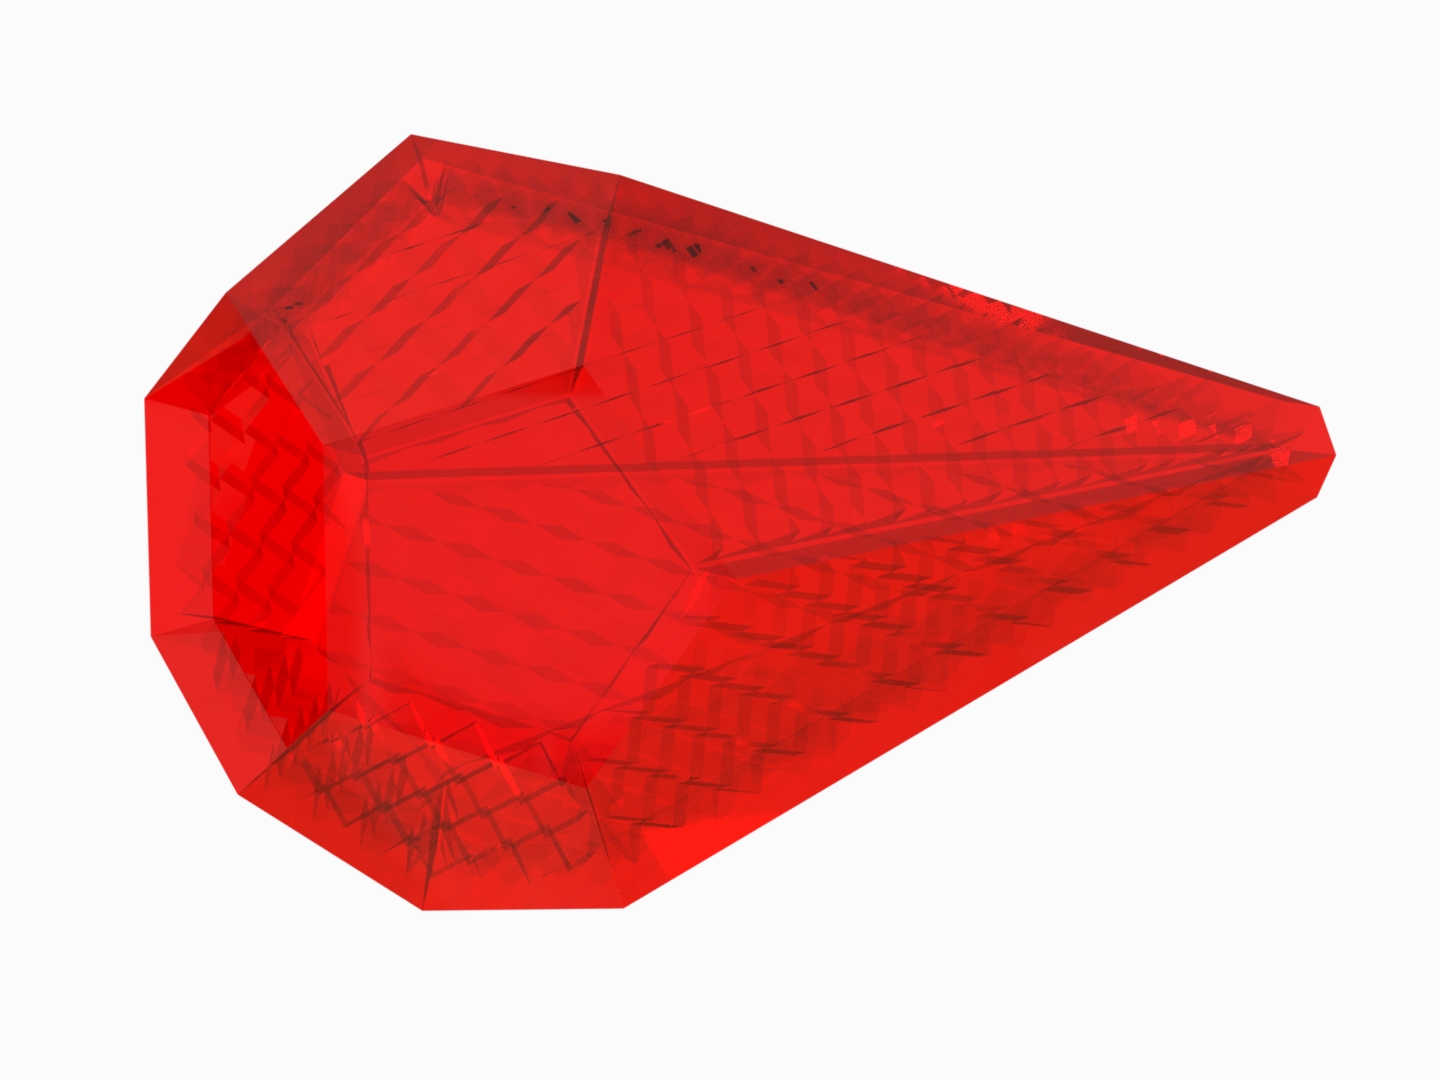 MUSE Design Winners - Rooblee Bicycle Safety Reflector